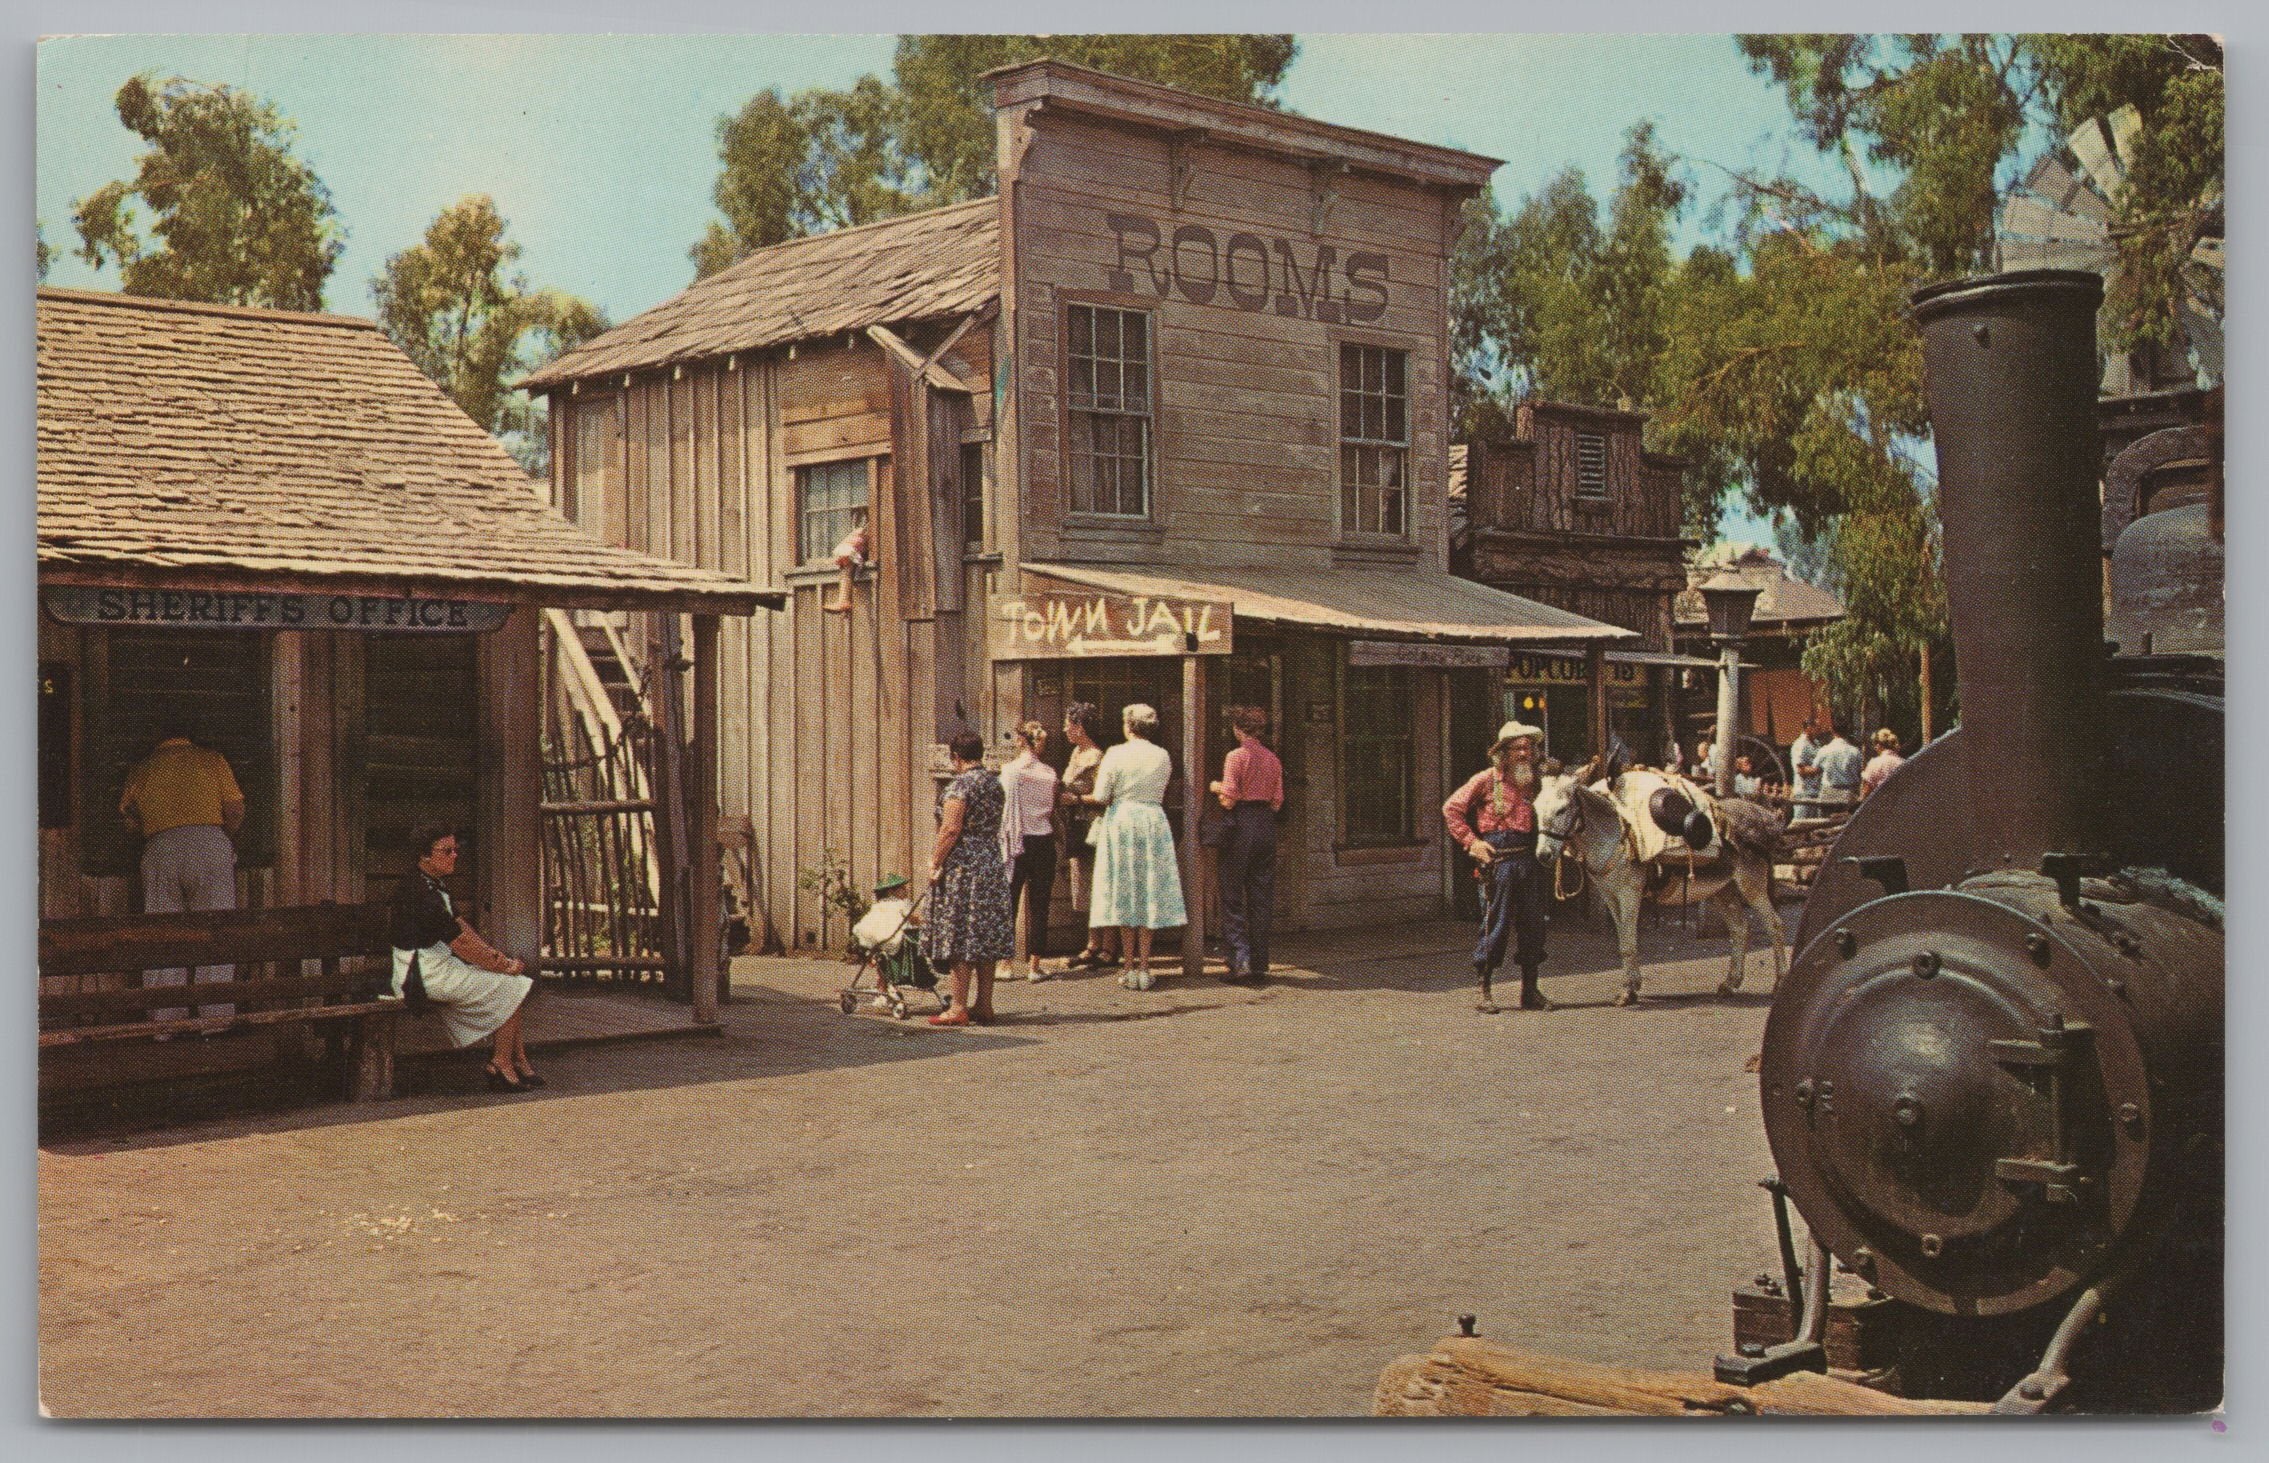 Goldie’s Palace, Knott’s Berry Farm And Ghost Town, Buena Park, California, Vintage Post Card.